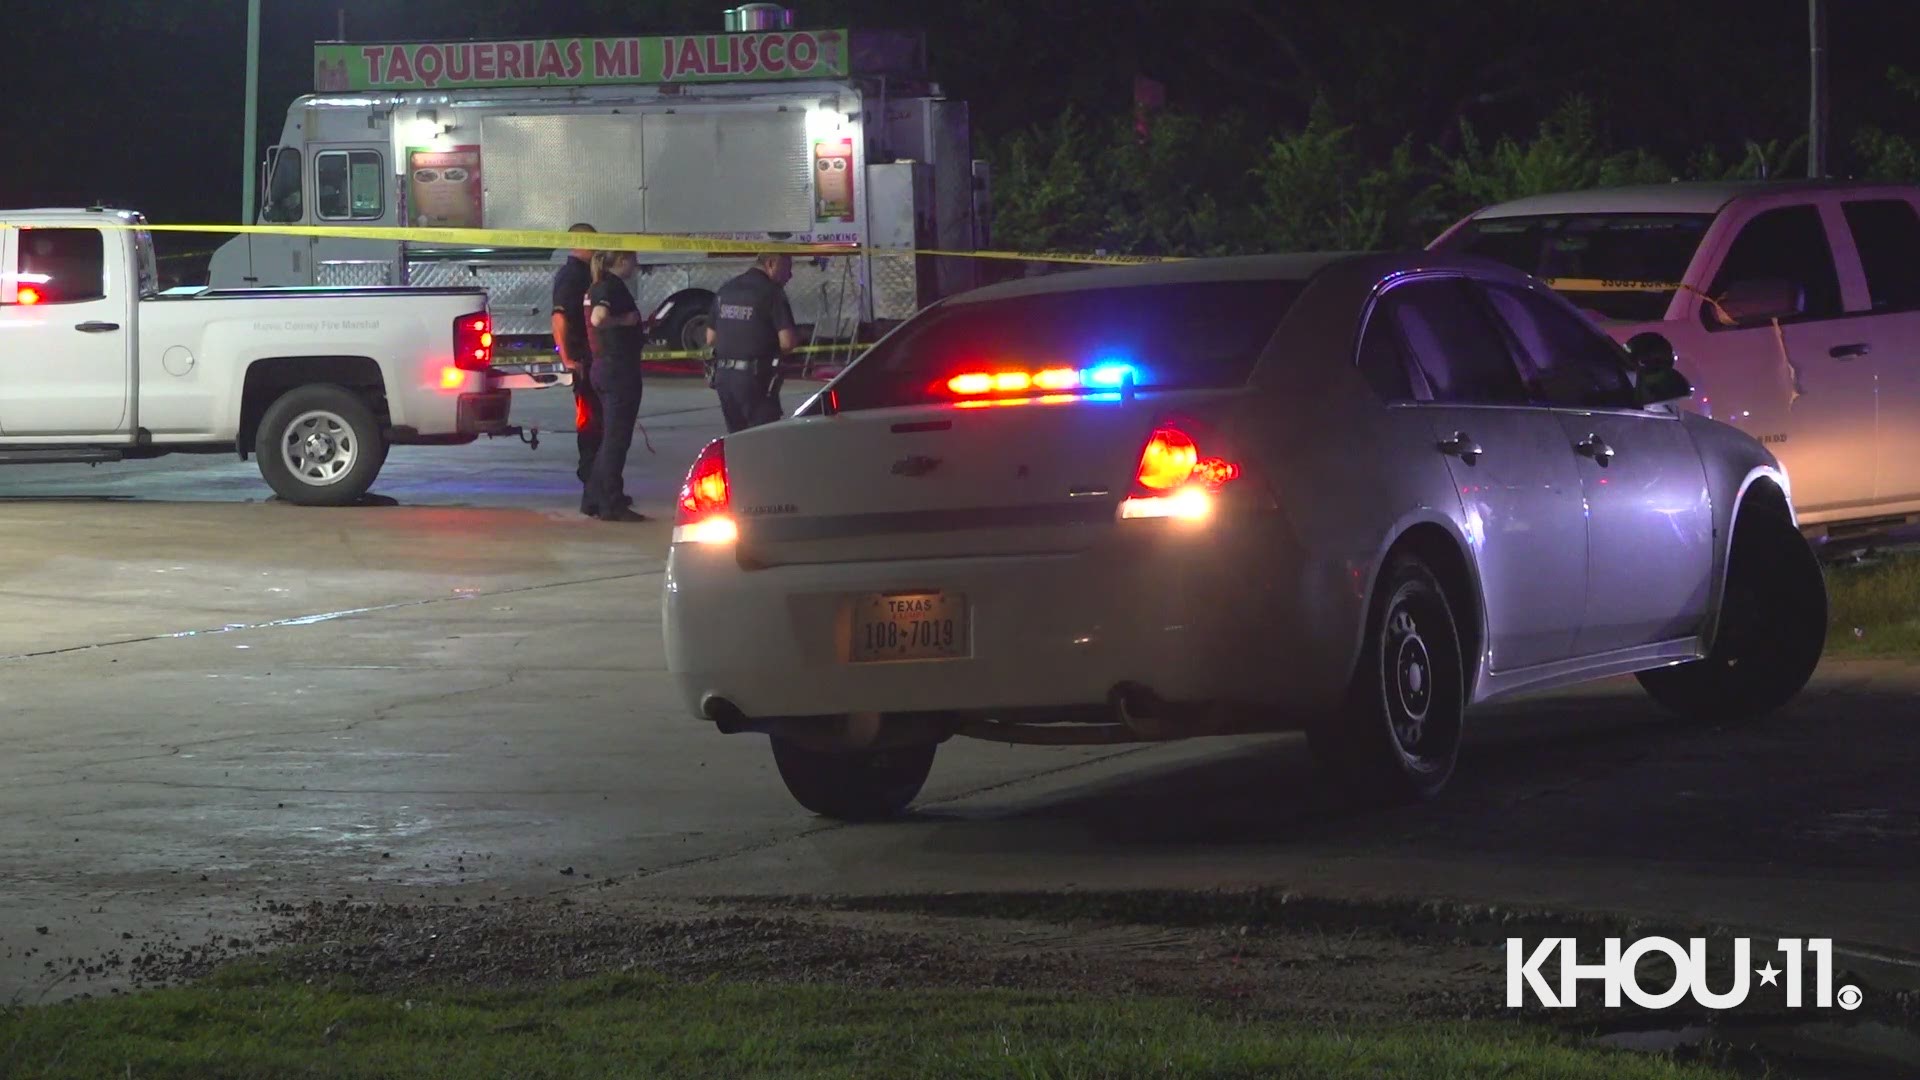 Two children and two adults were burned after someone fired shots into their vehicle, causing fireworks inside of it to go off, according to the Harris County Fire Marshal's Office.